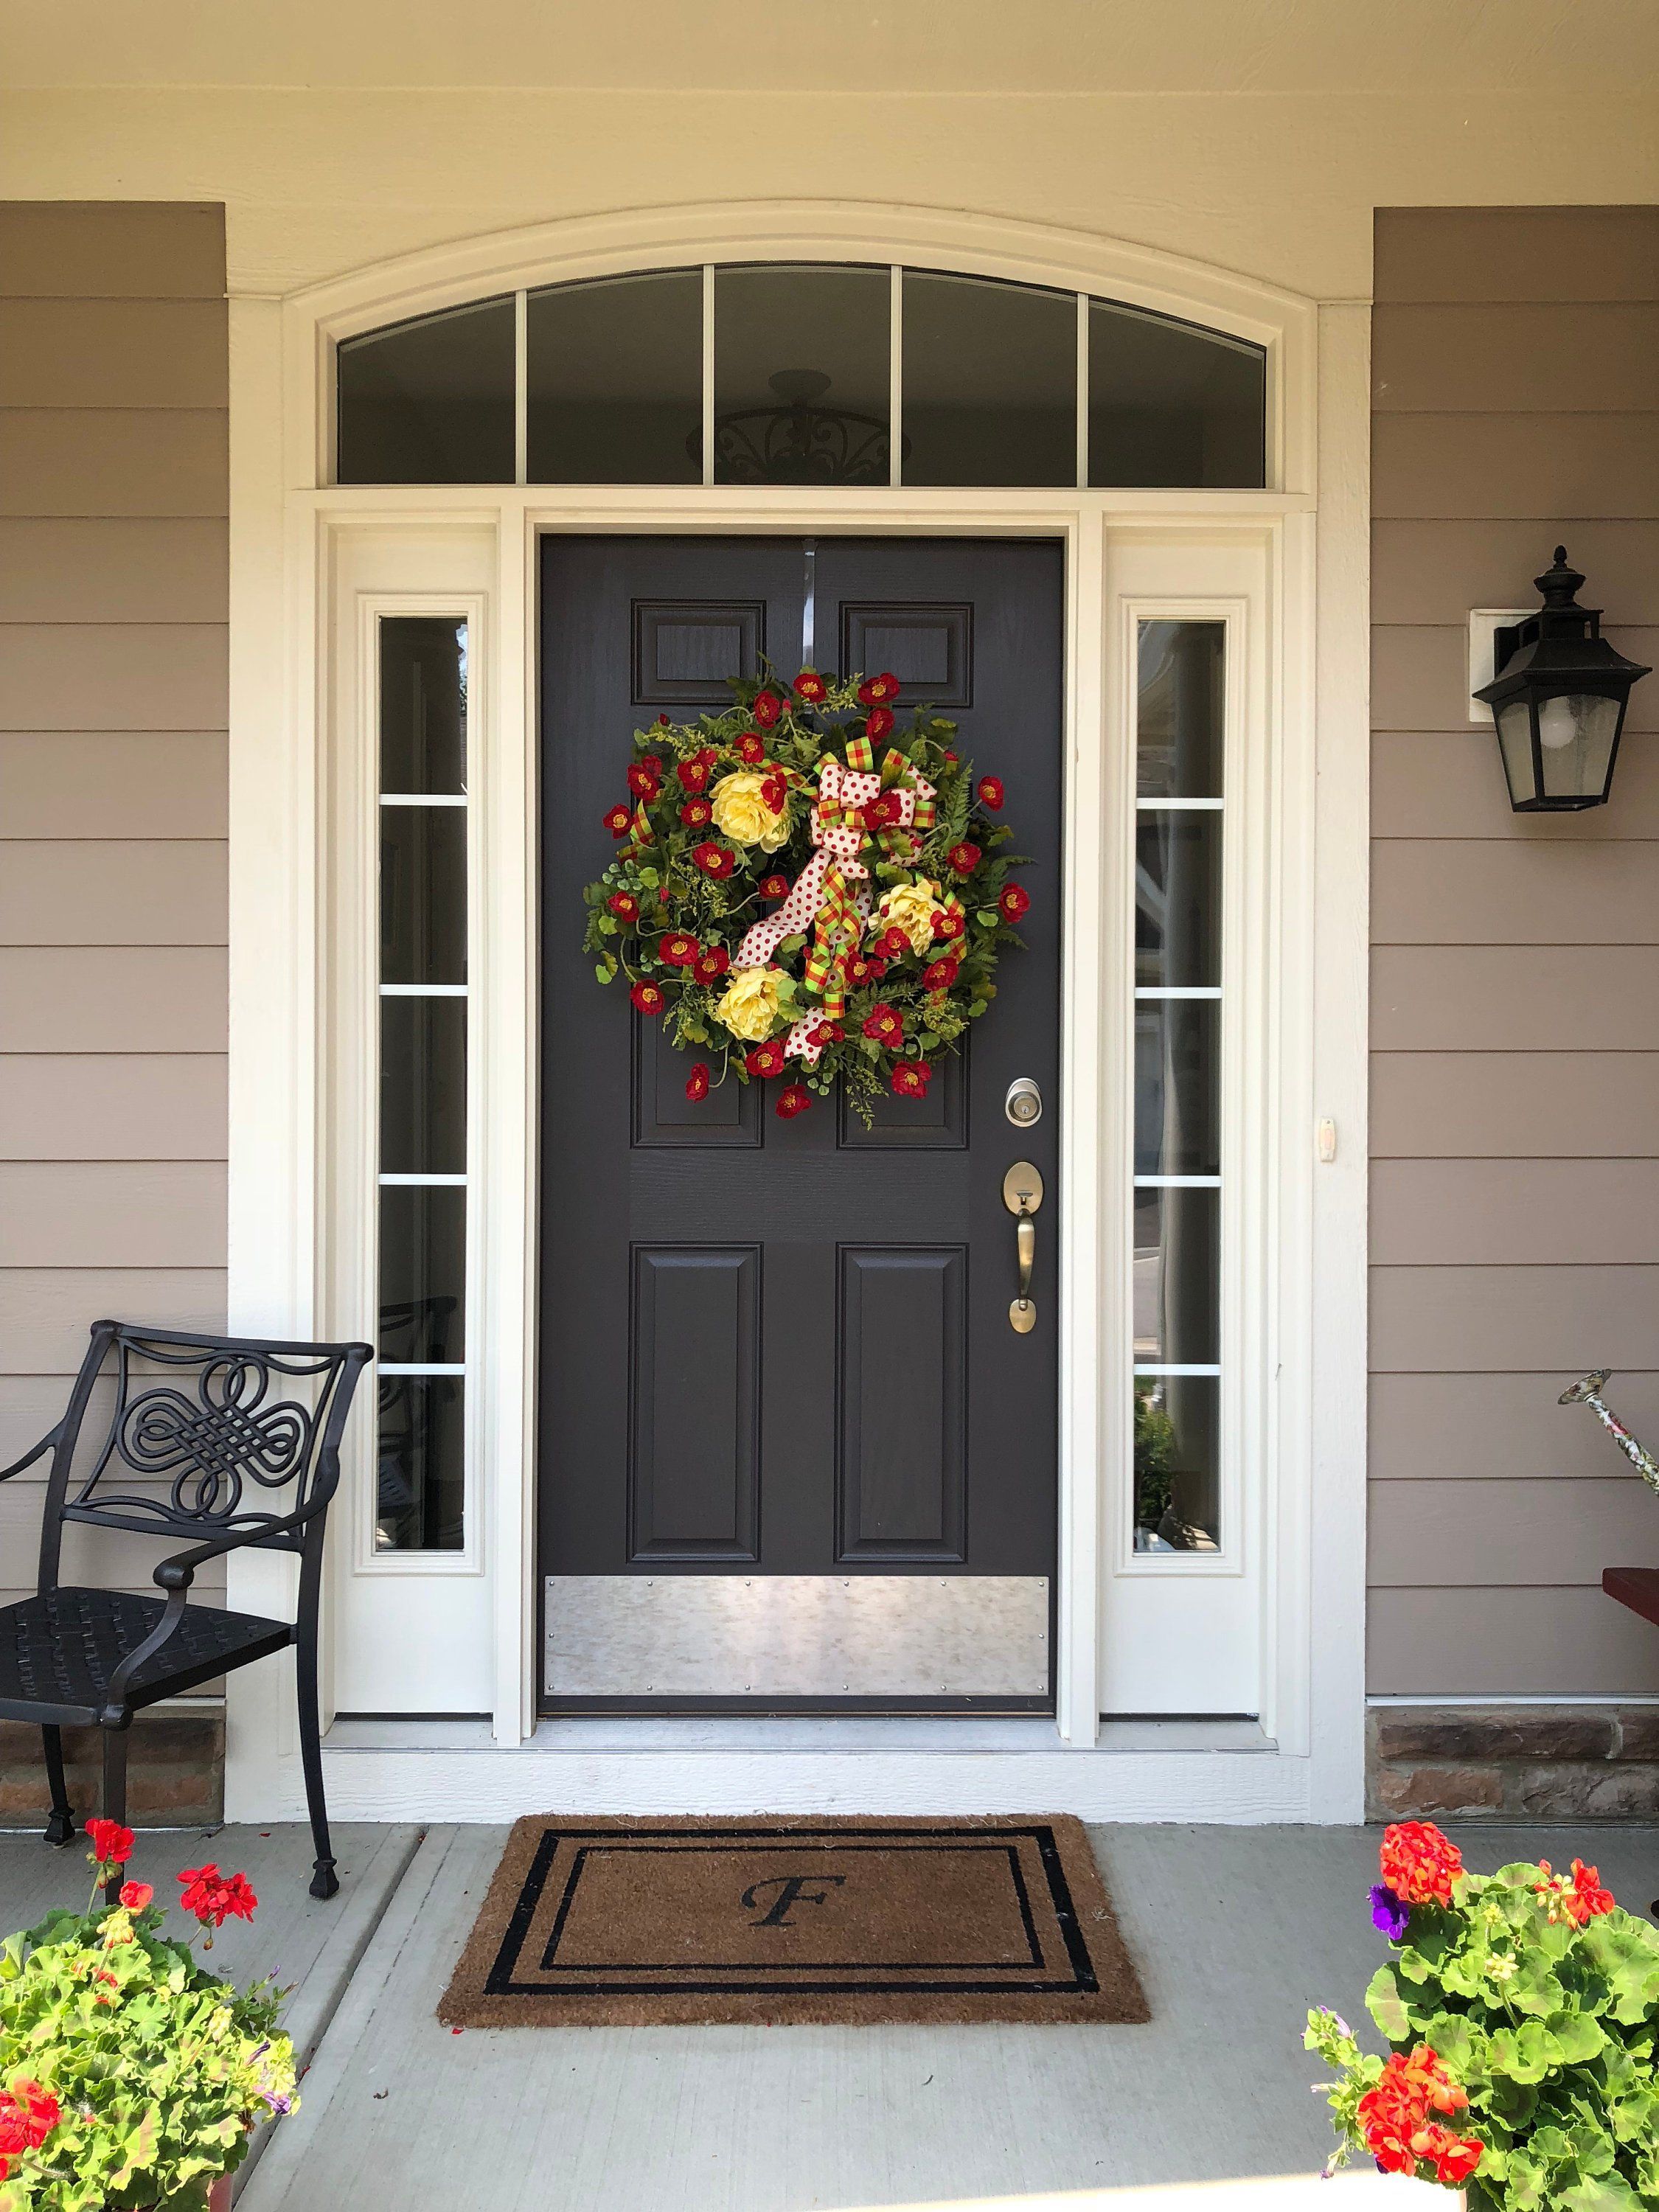 Summer Wreaths for Front Door Large Spring Wreath Outdoor Front Door Wreath Peonies Wreath Grapevine Wreath Mother's Day Gift from Husband -   14 planting Outdoor front doors ideas